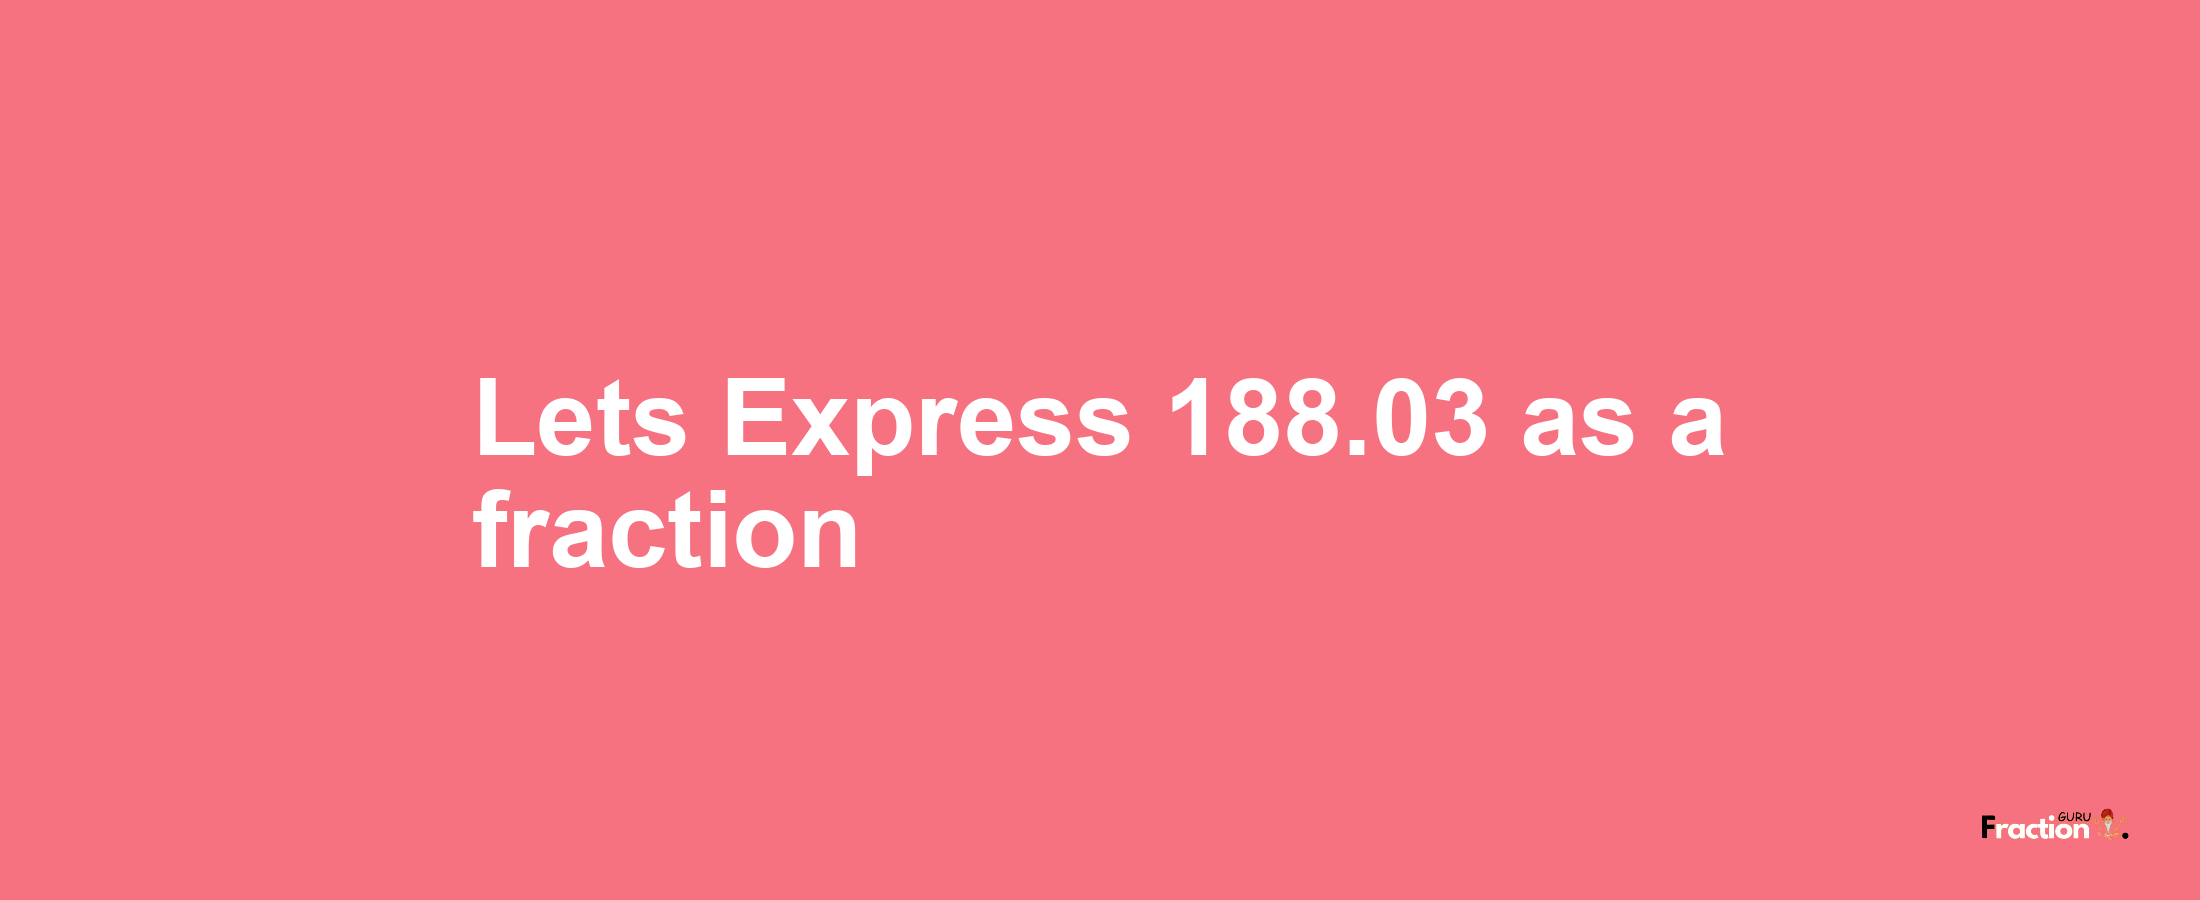 Lets Express 188.03 as afraction